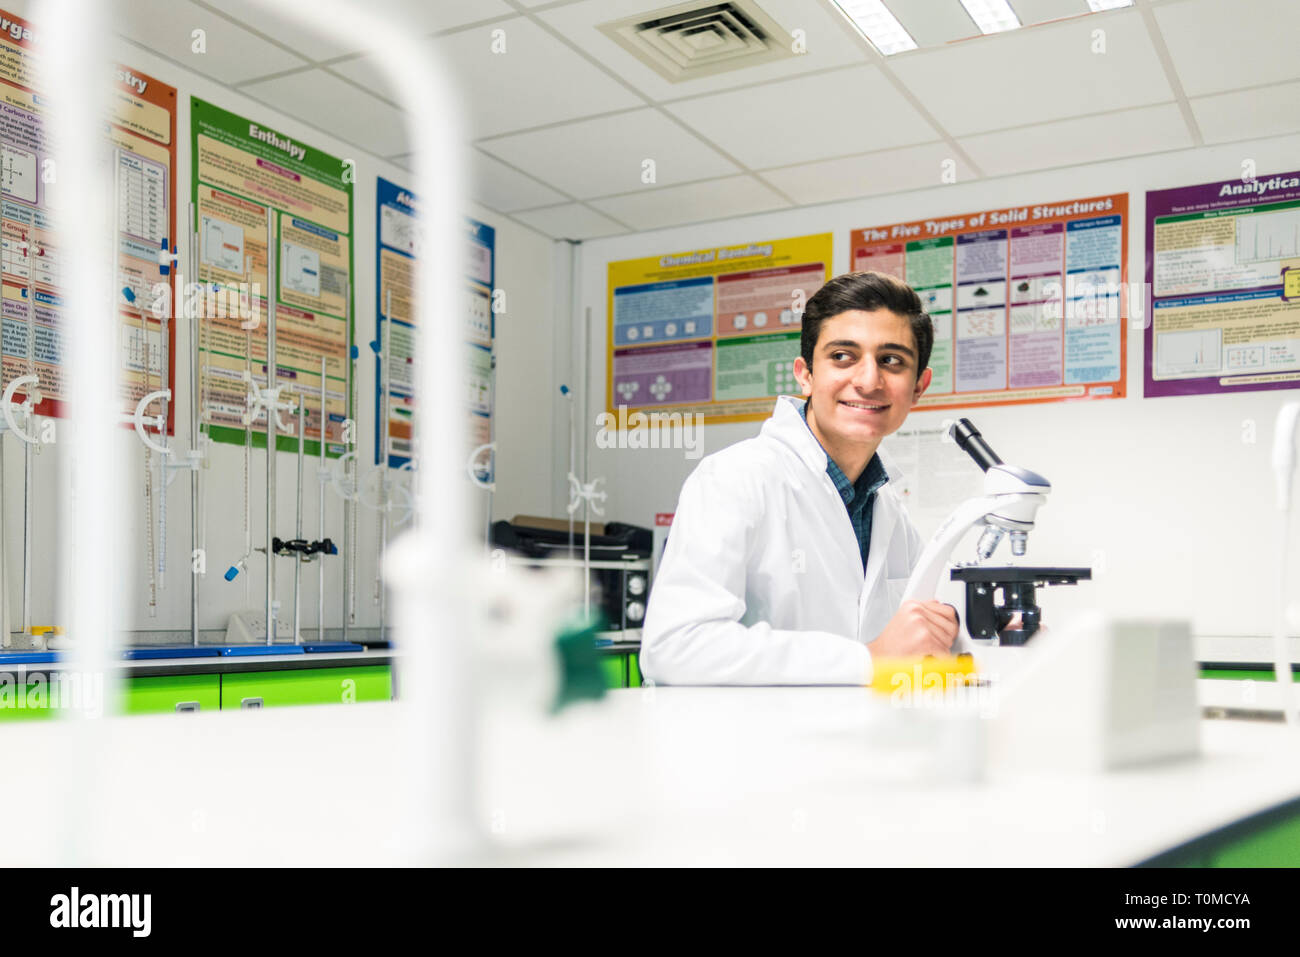 A young male student works in the science lab of a cambridge college in a white lab coat Stock Photo